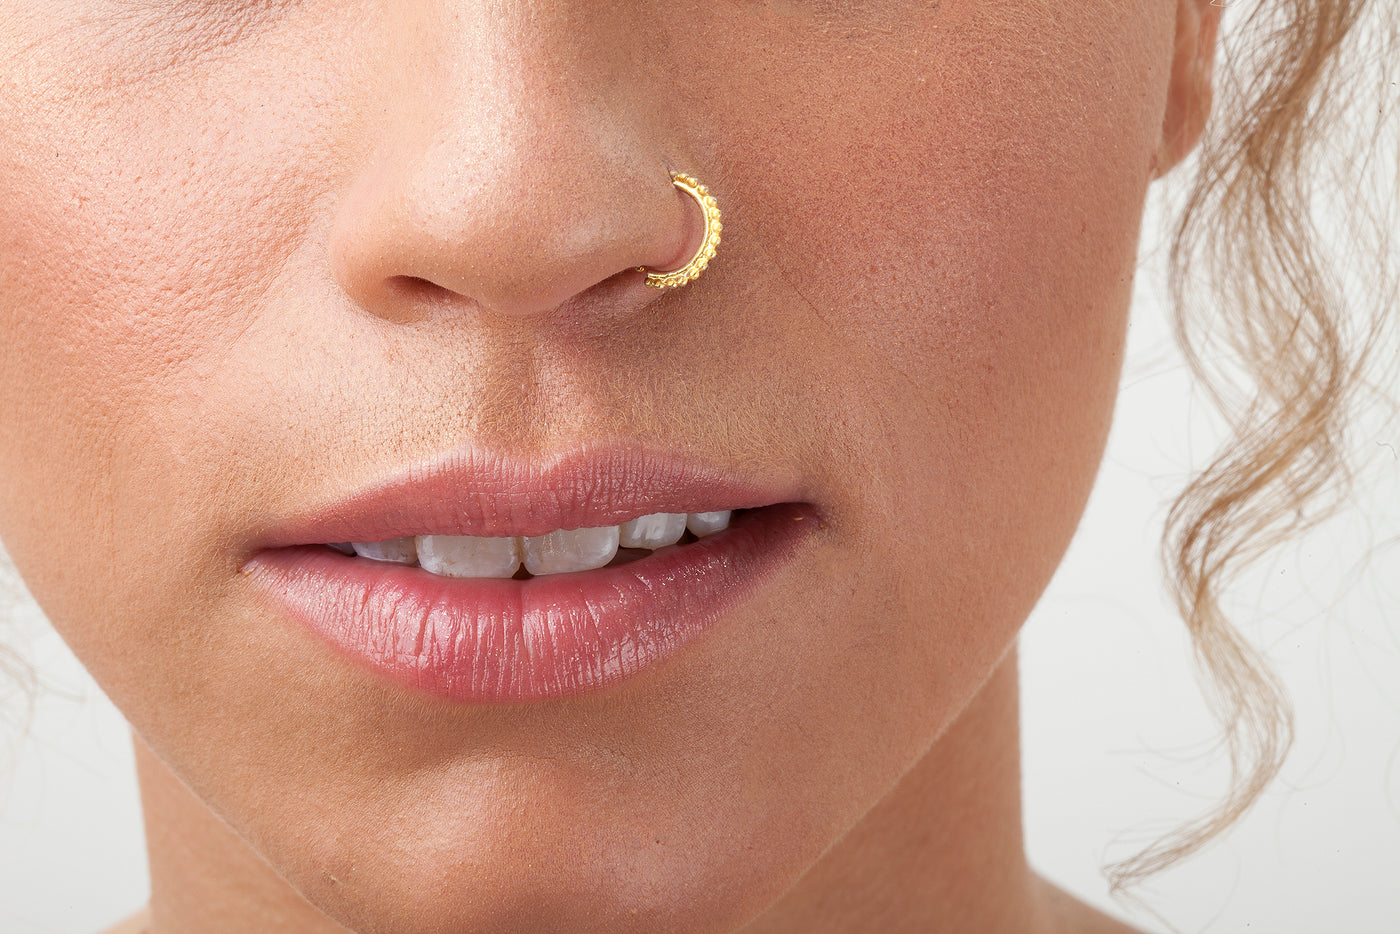 How To Put In A Hoop Nose Ring – Dr. Piercing Aftercare